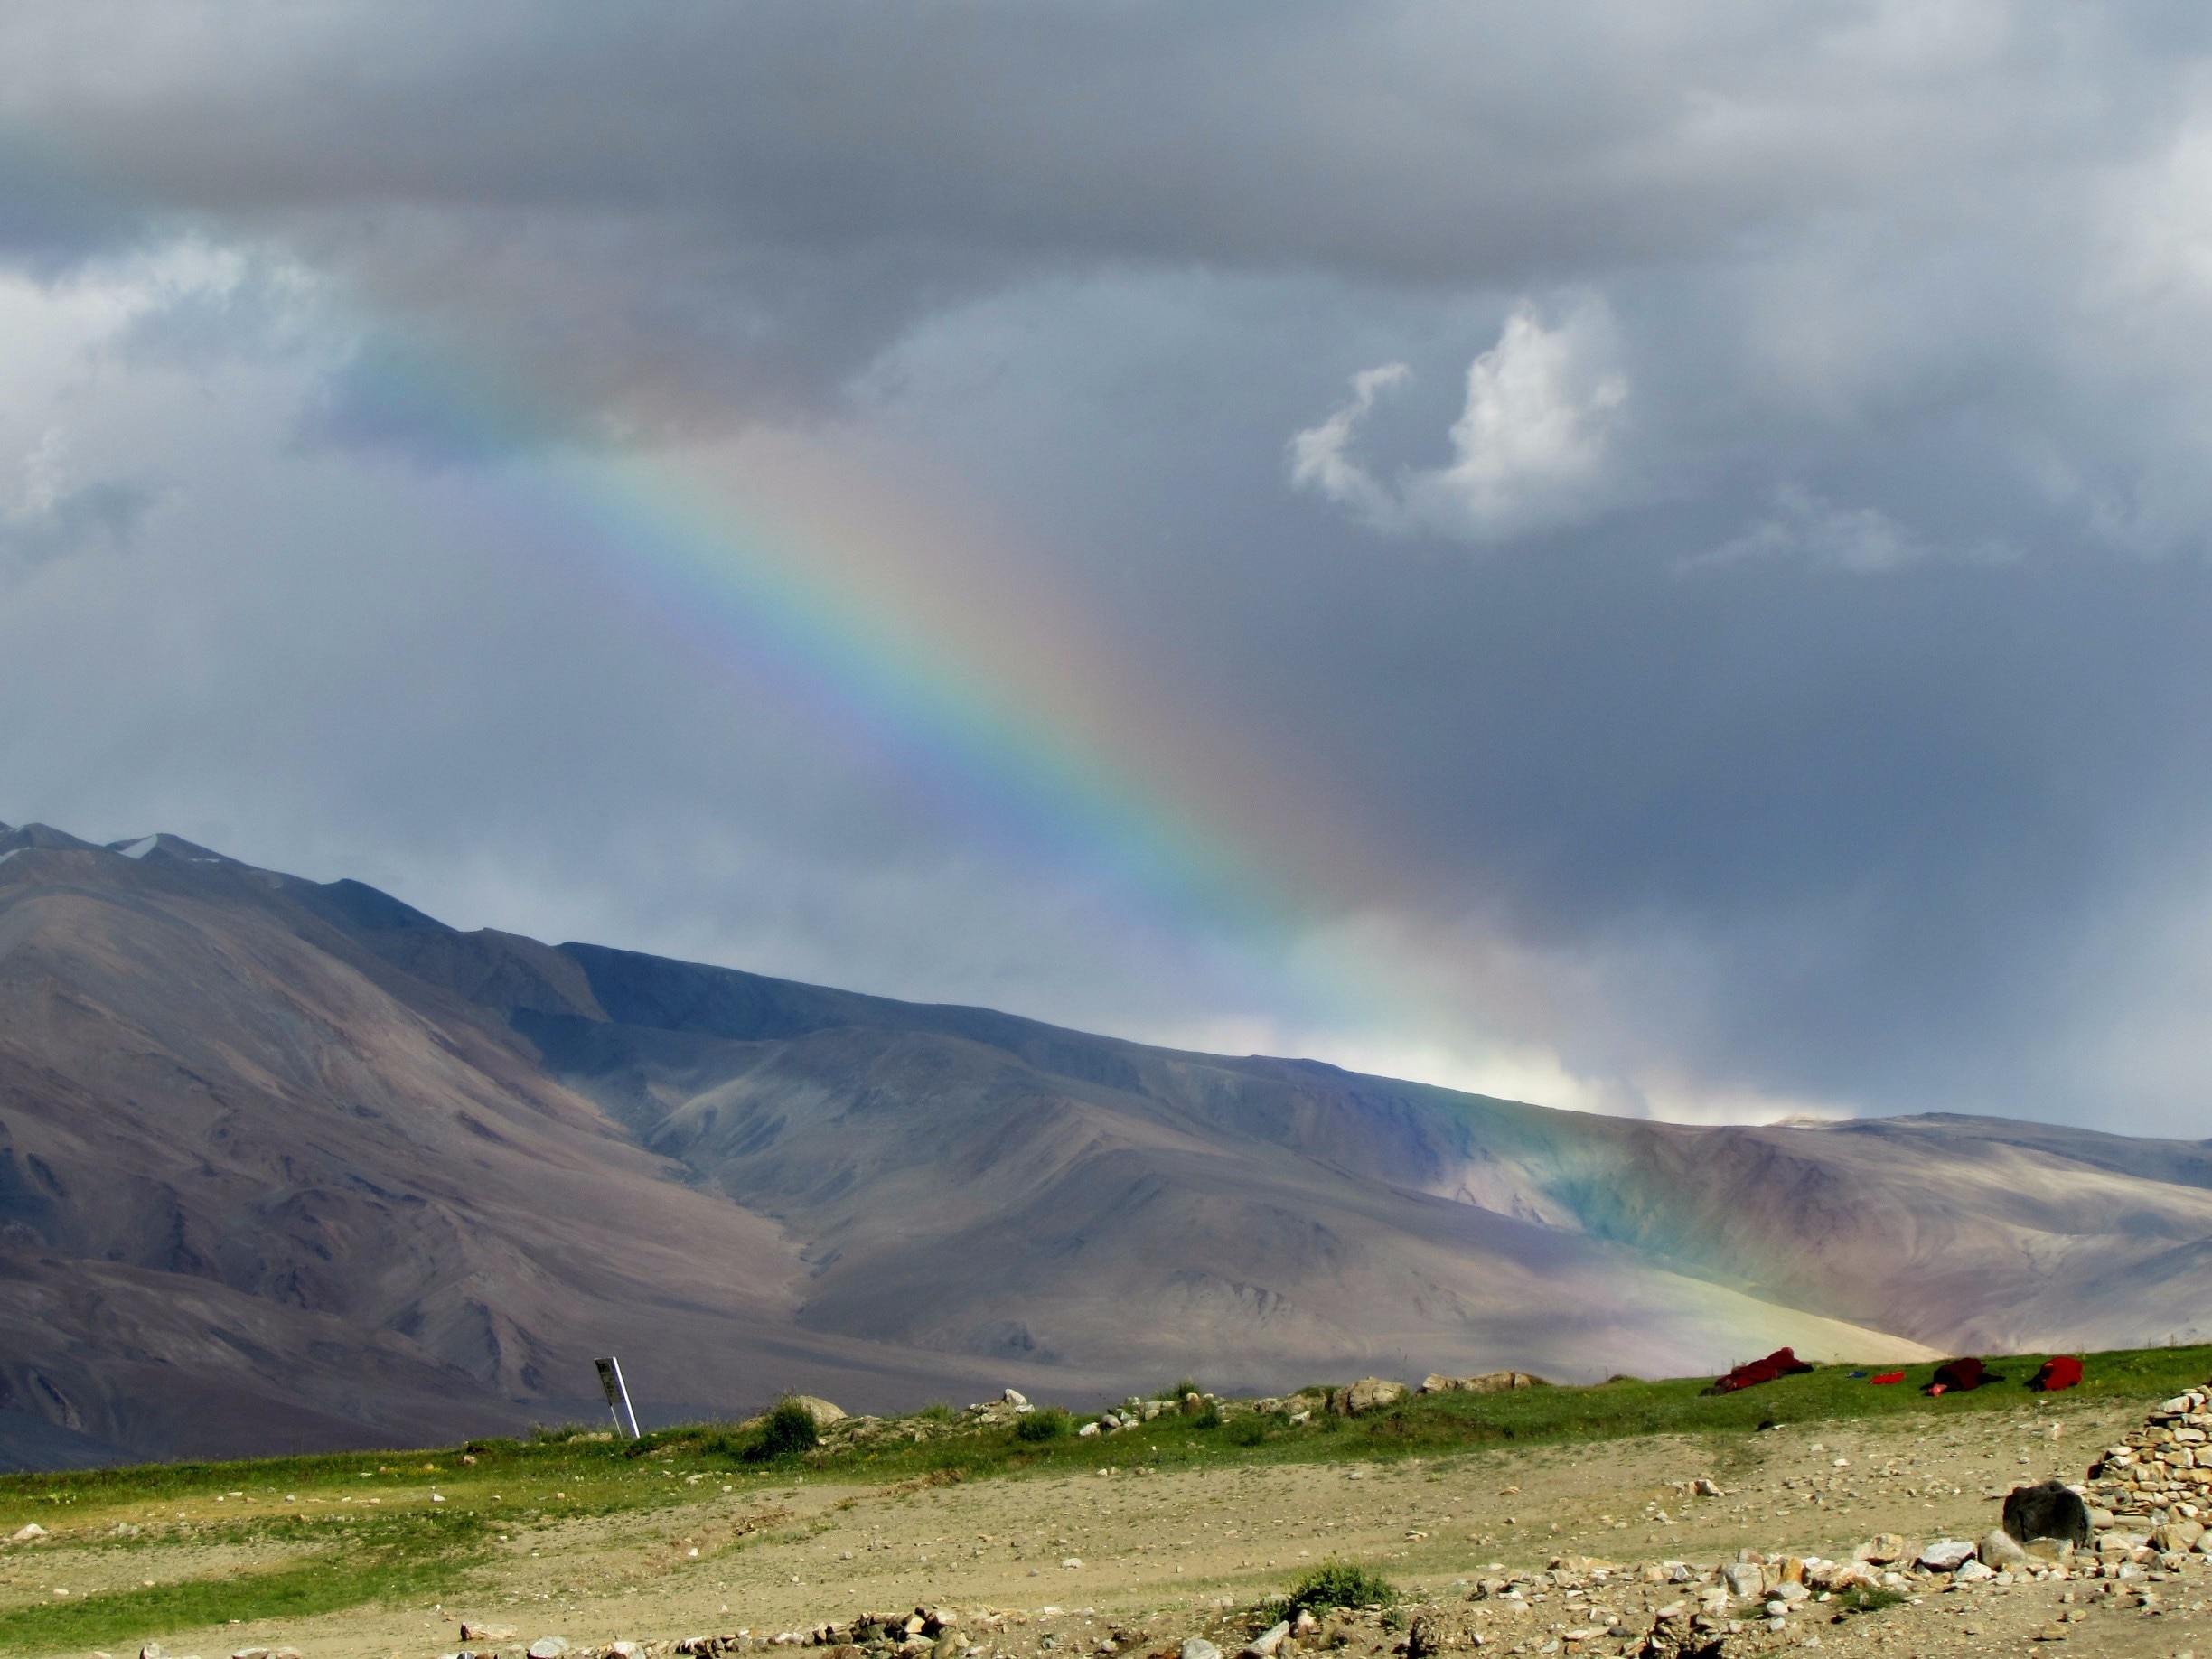 Monks having a rest at the end of the rainbow during the monastery festival.

Most inhabited by Chang-Pa nomads, at 4560 m, Korzok is probably the highest permanent settlement in India. Tso Moriri Lake, the backdrop of this village, is revered and considered sacred by the local people.